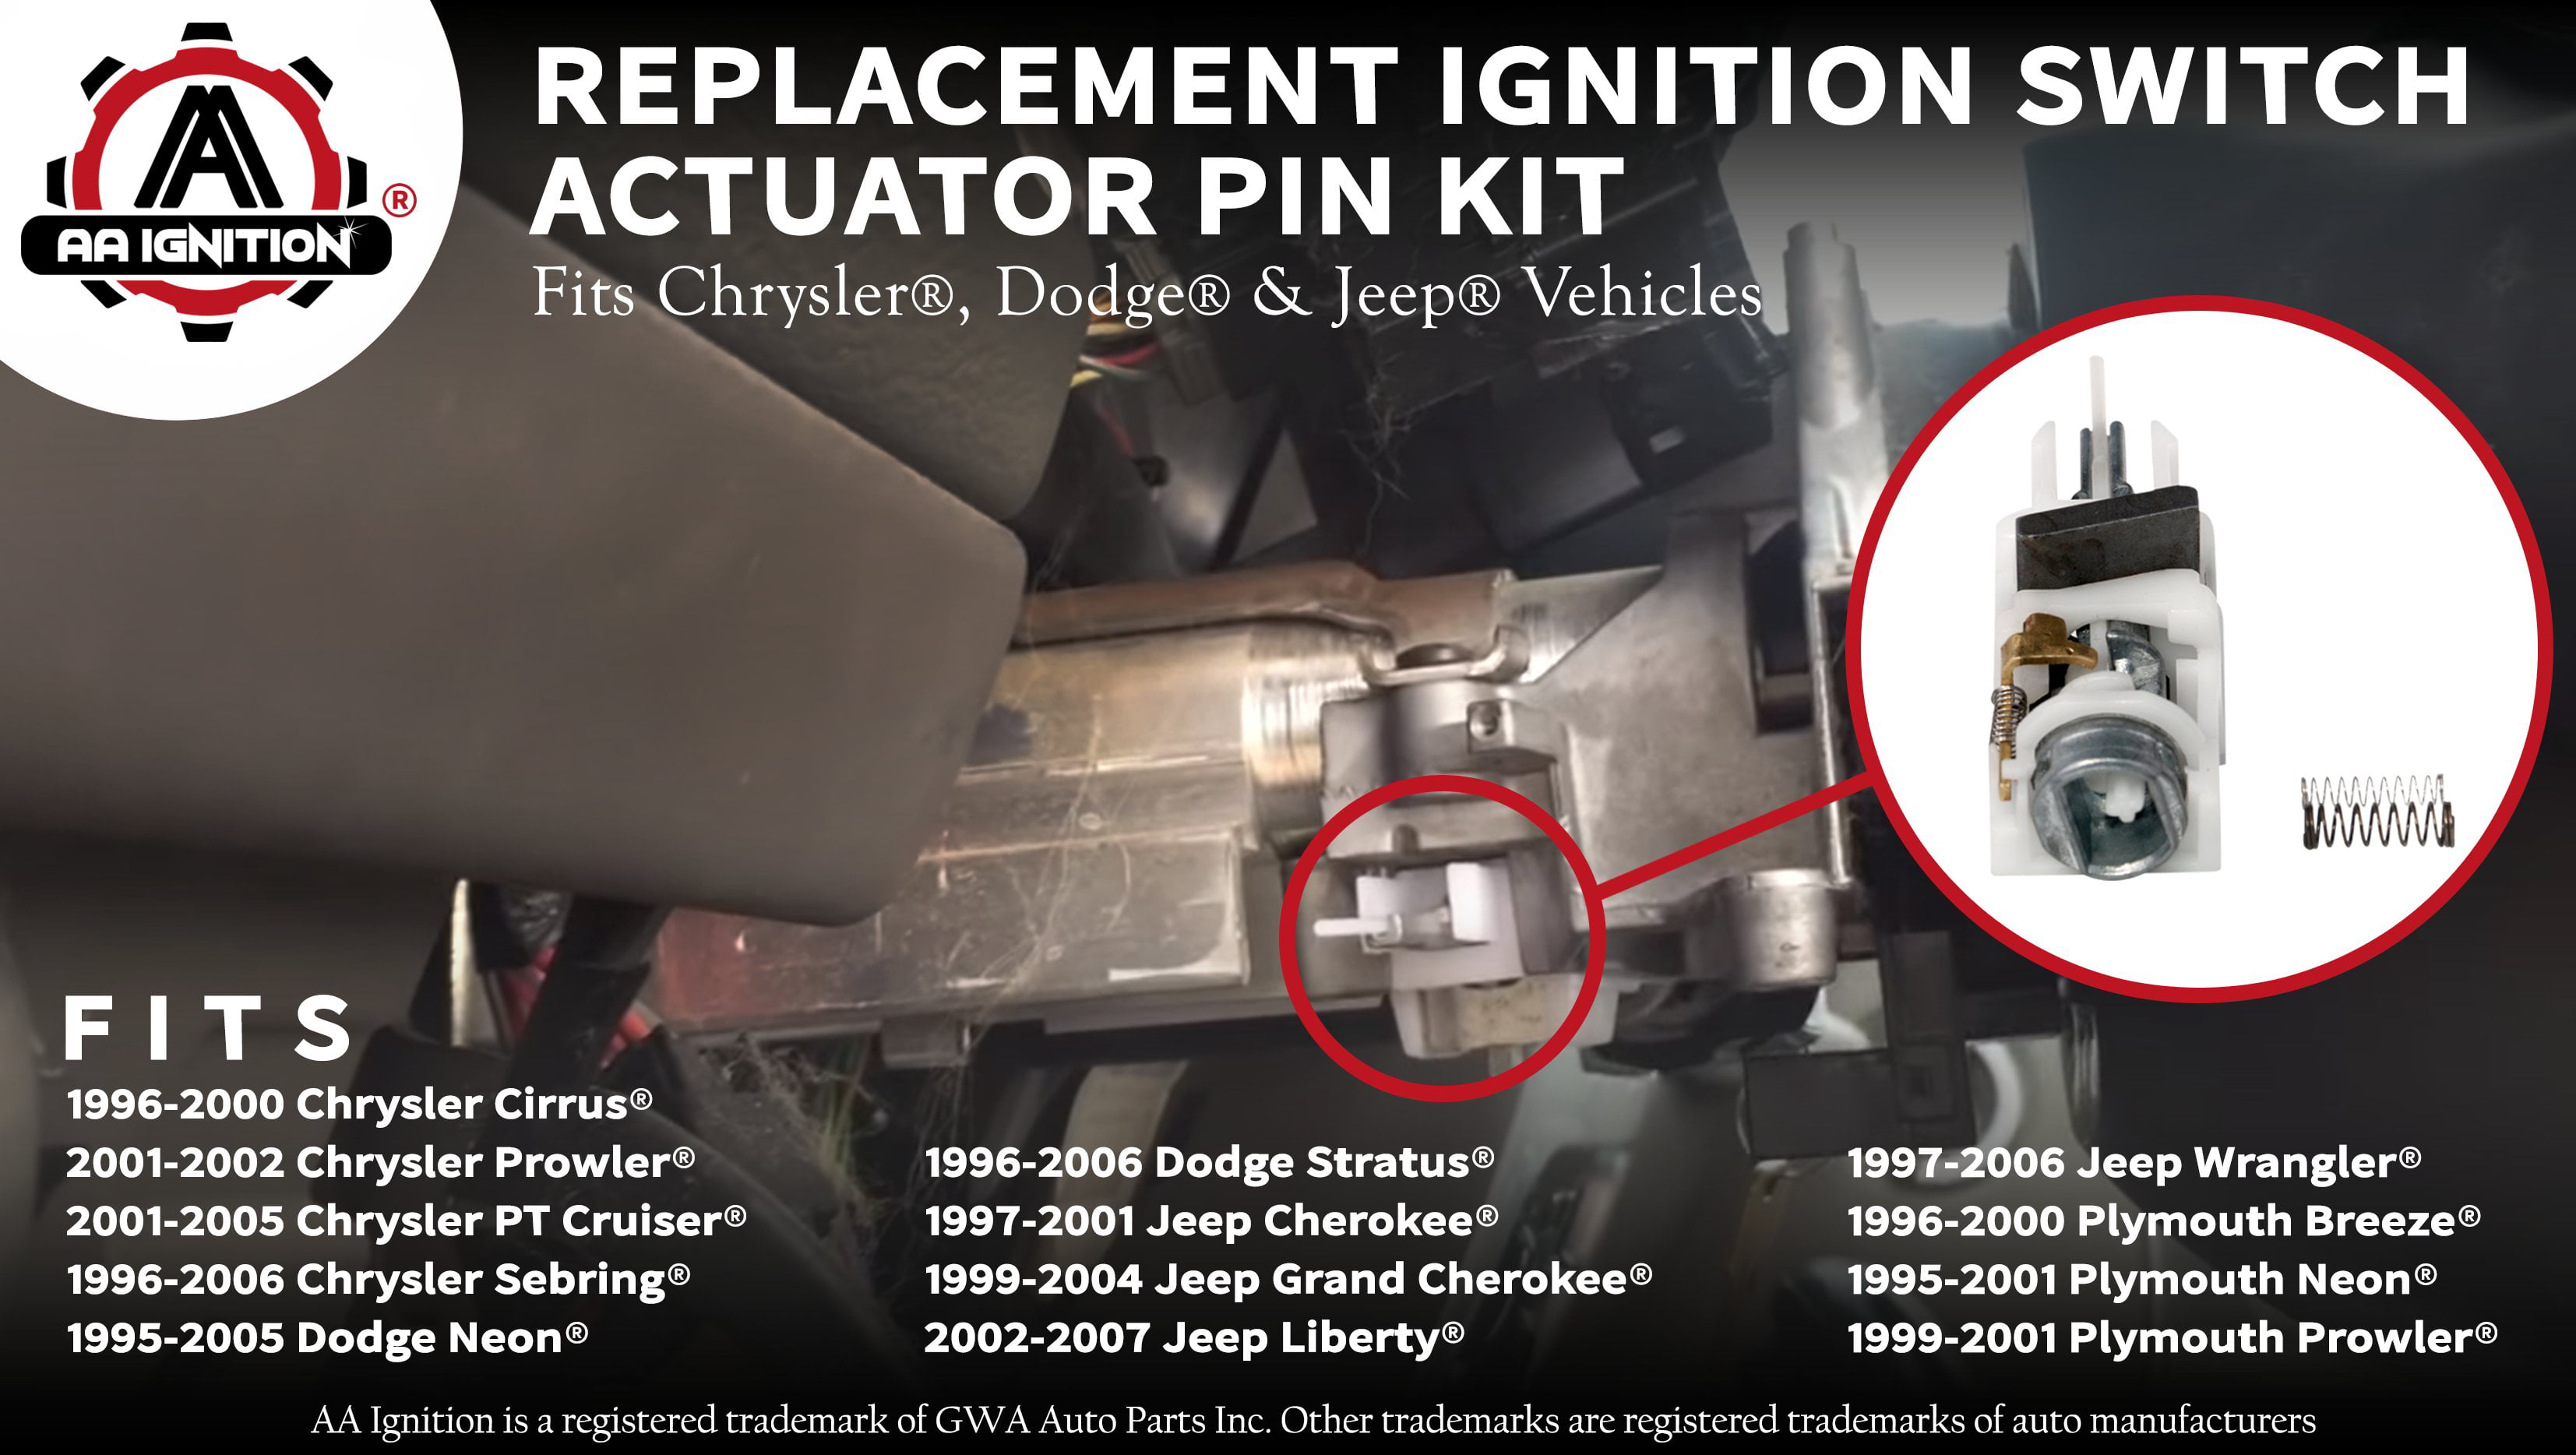 Ignition Switch Actuator Pin - Replaces# 4690492AB, 4664099, 924-704,  924704 - Fits 1997 - 2006 Jeep Wrangler, 1999 - 2004 Grand Cherokee, 02 -  07 Liberty, 1995 - 2005 Dodge Neon, Chrysler PT Cruiser 